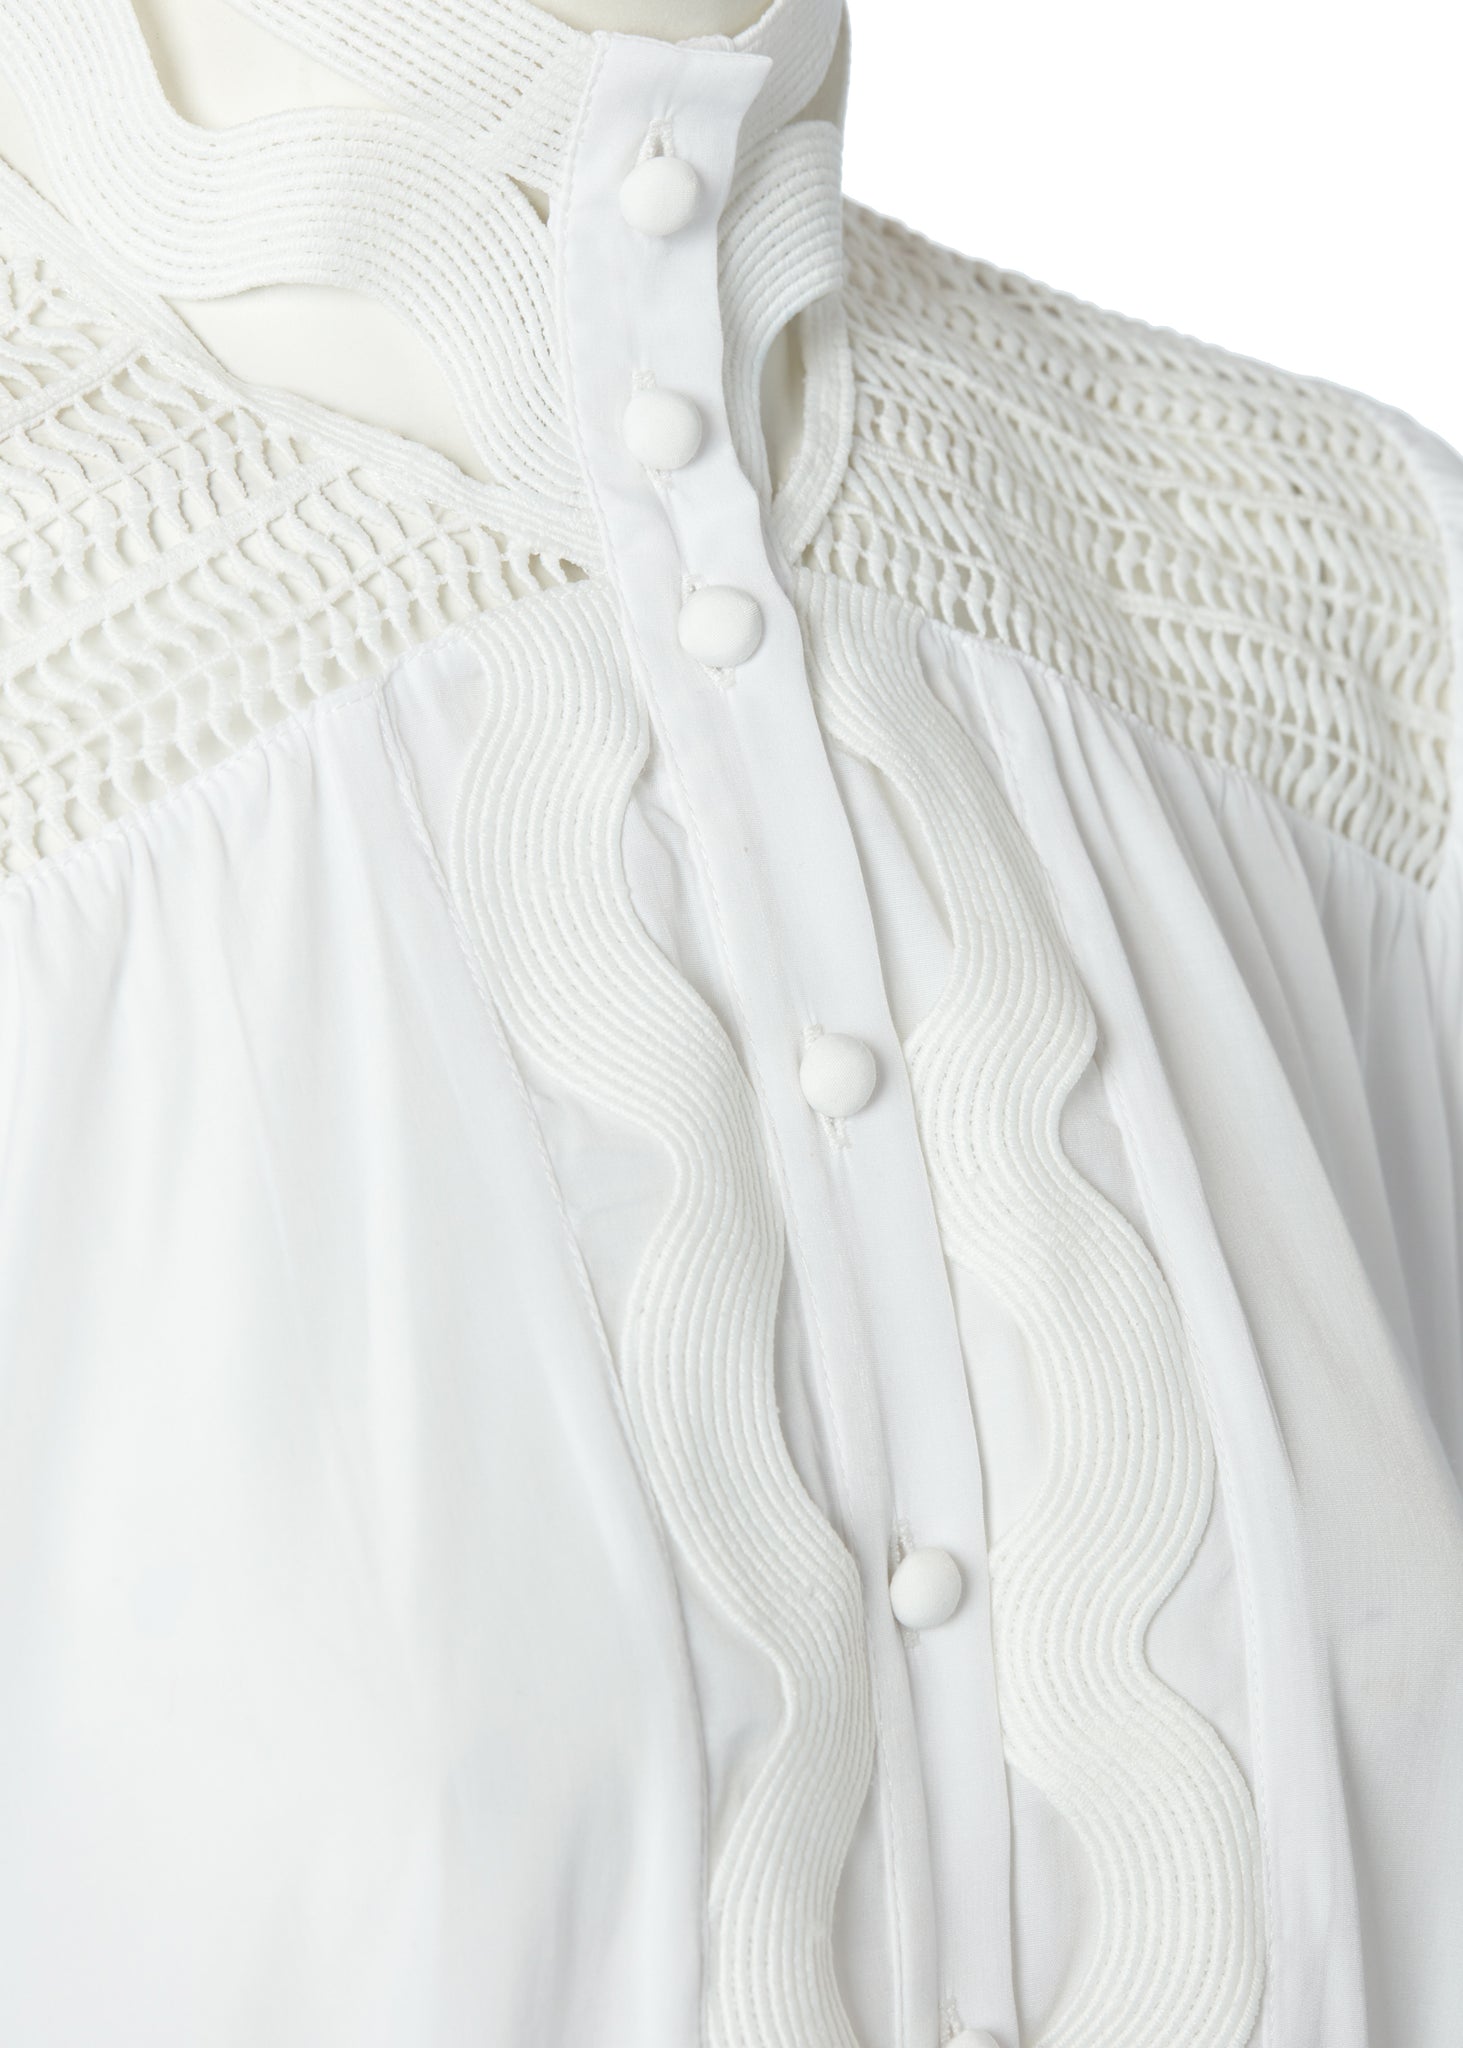 button detail on womens white polyester shirt with lace detail to the collar shoulders and arm cuffs and balloon sleeve